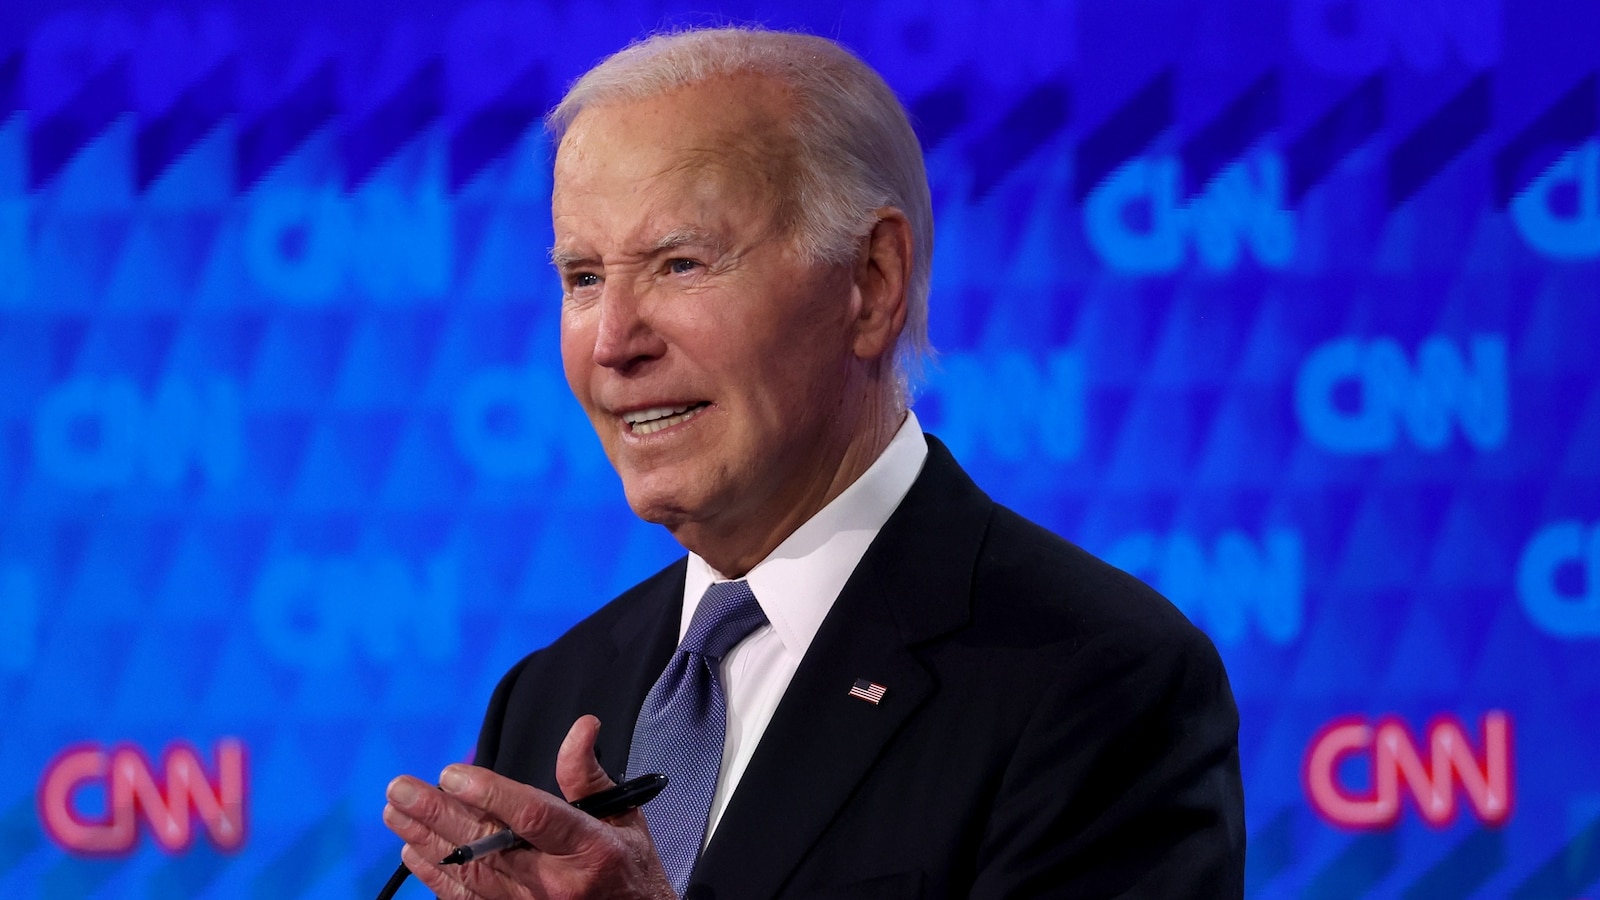 Democratic donors torn as Biden campaign works to calm anxieties